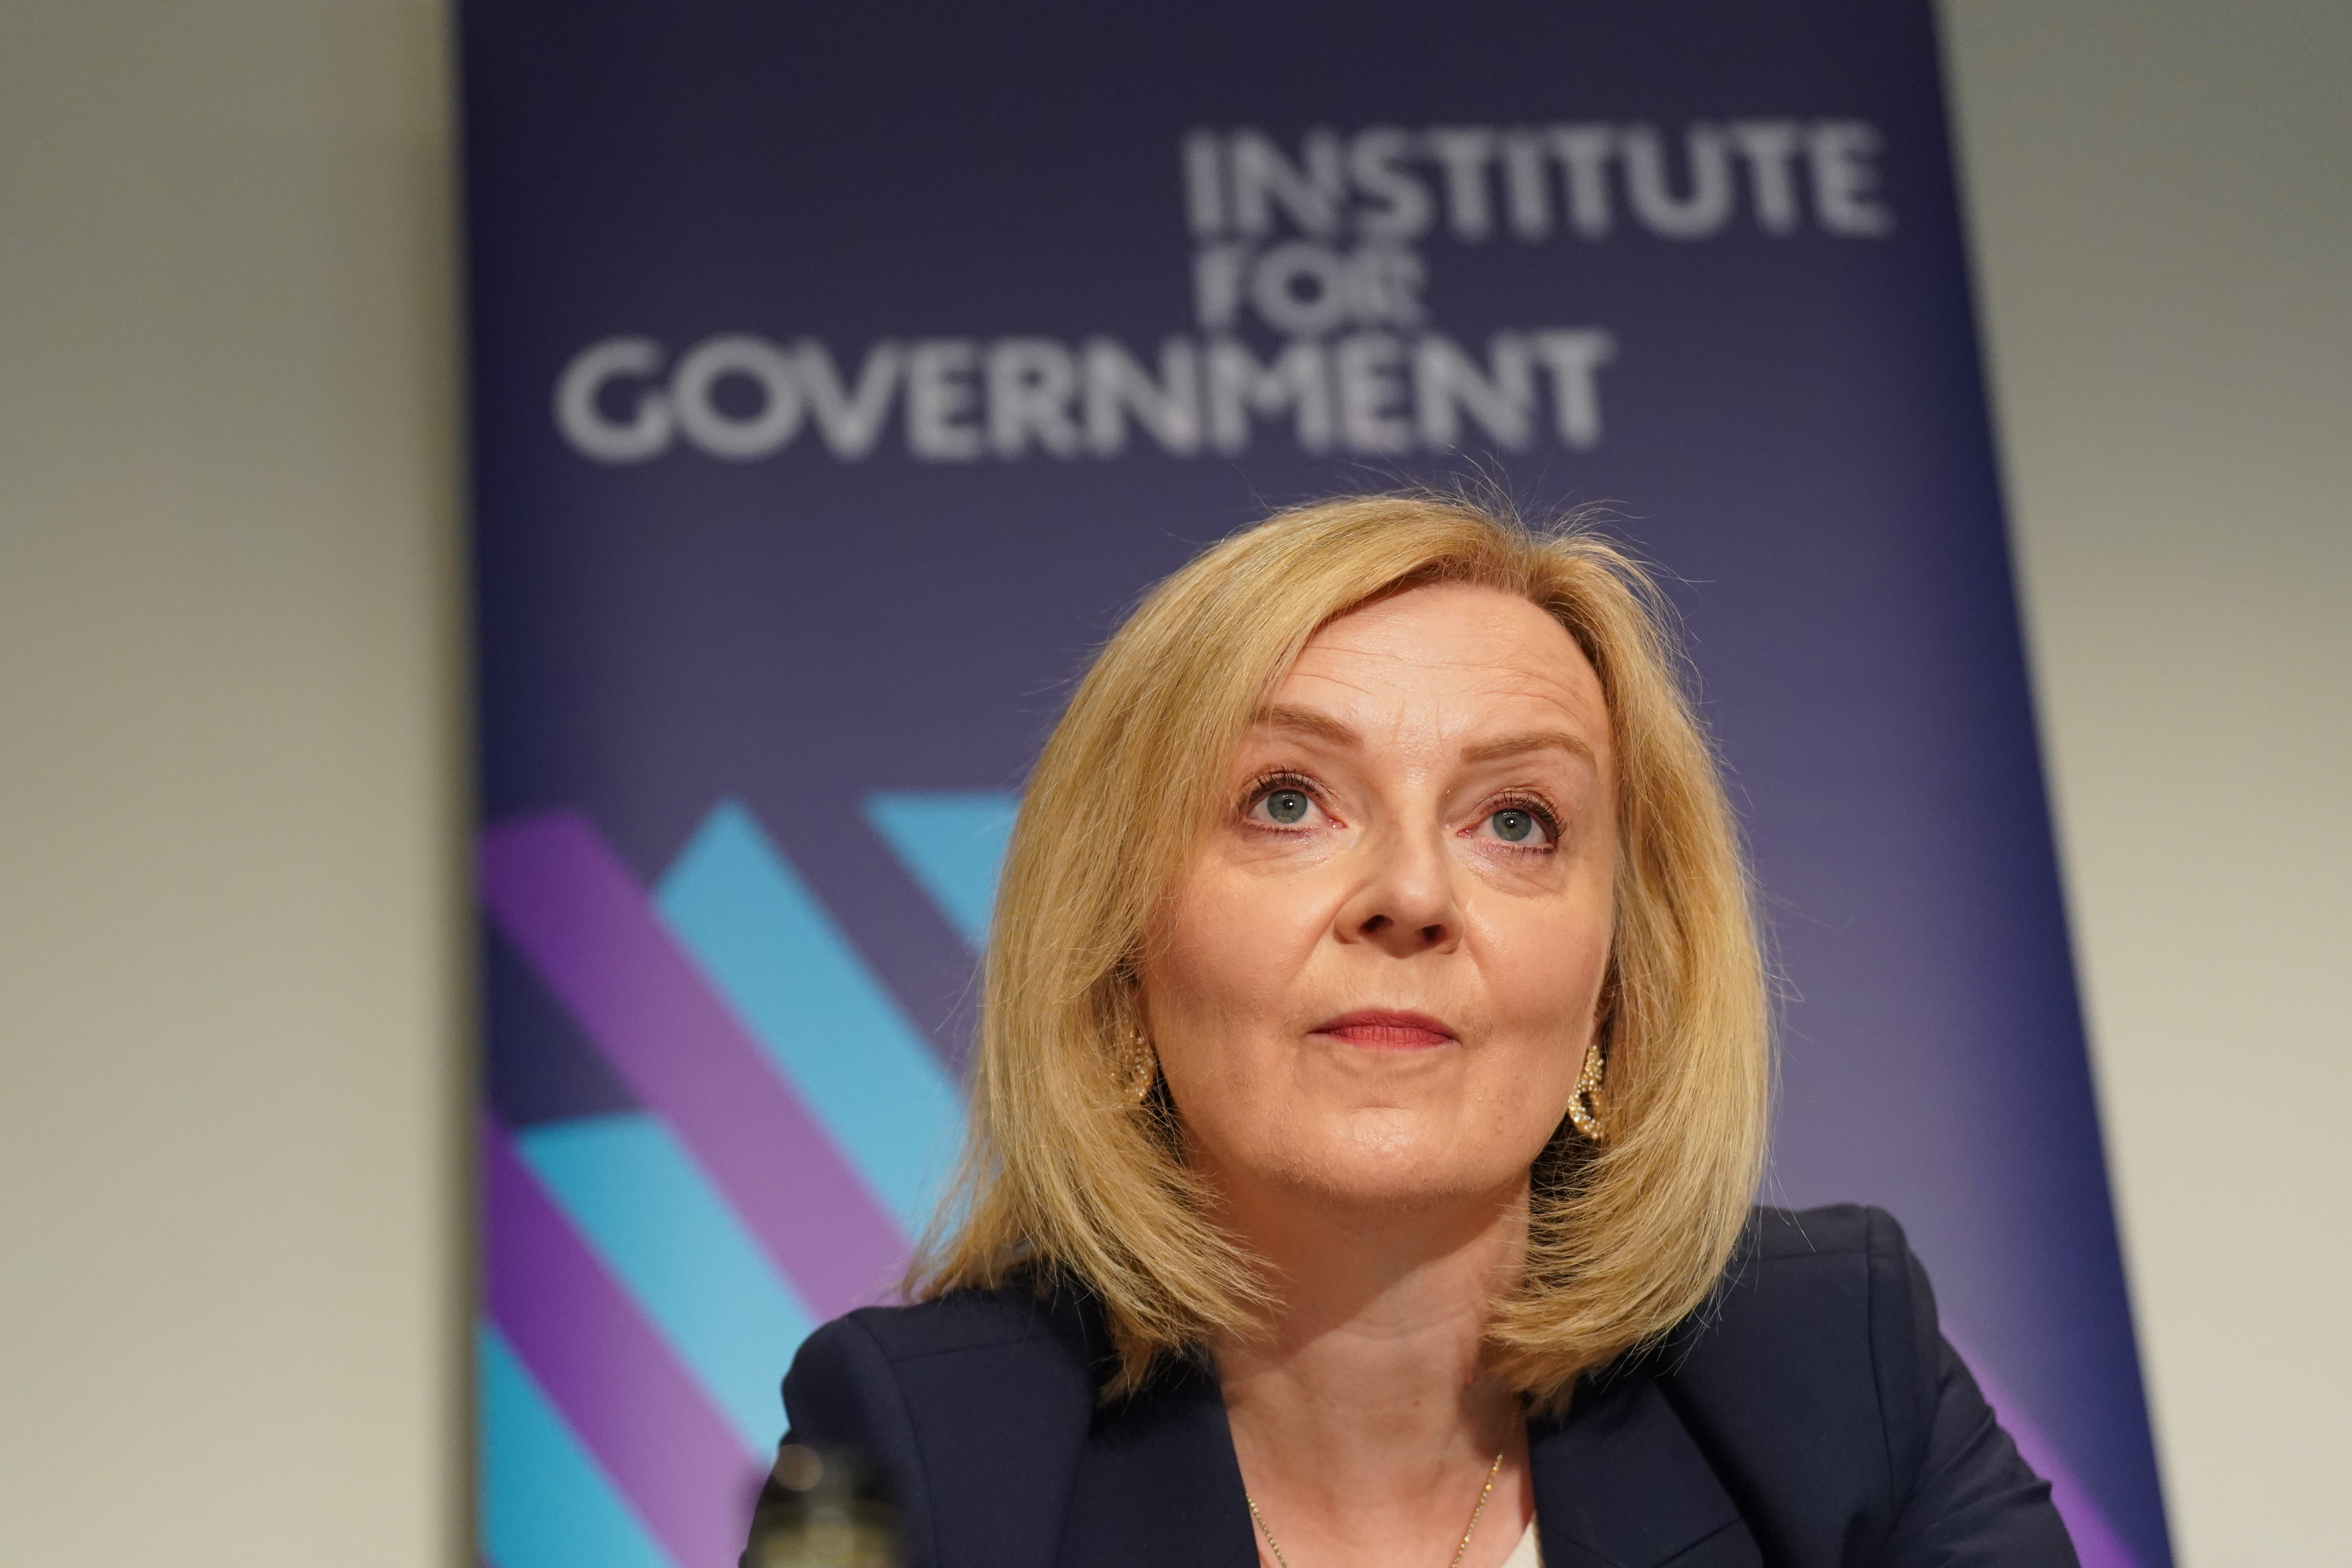 Mr Cleverly tried to blame former prime minister Liz Truss’s disastrous mini-budget on the Labour Party